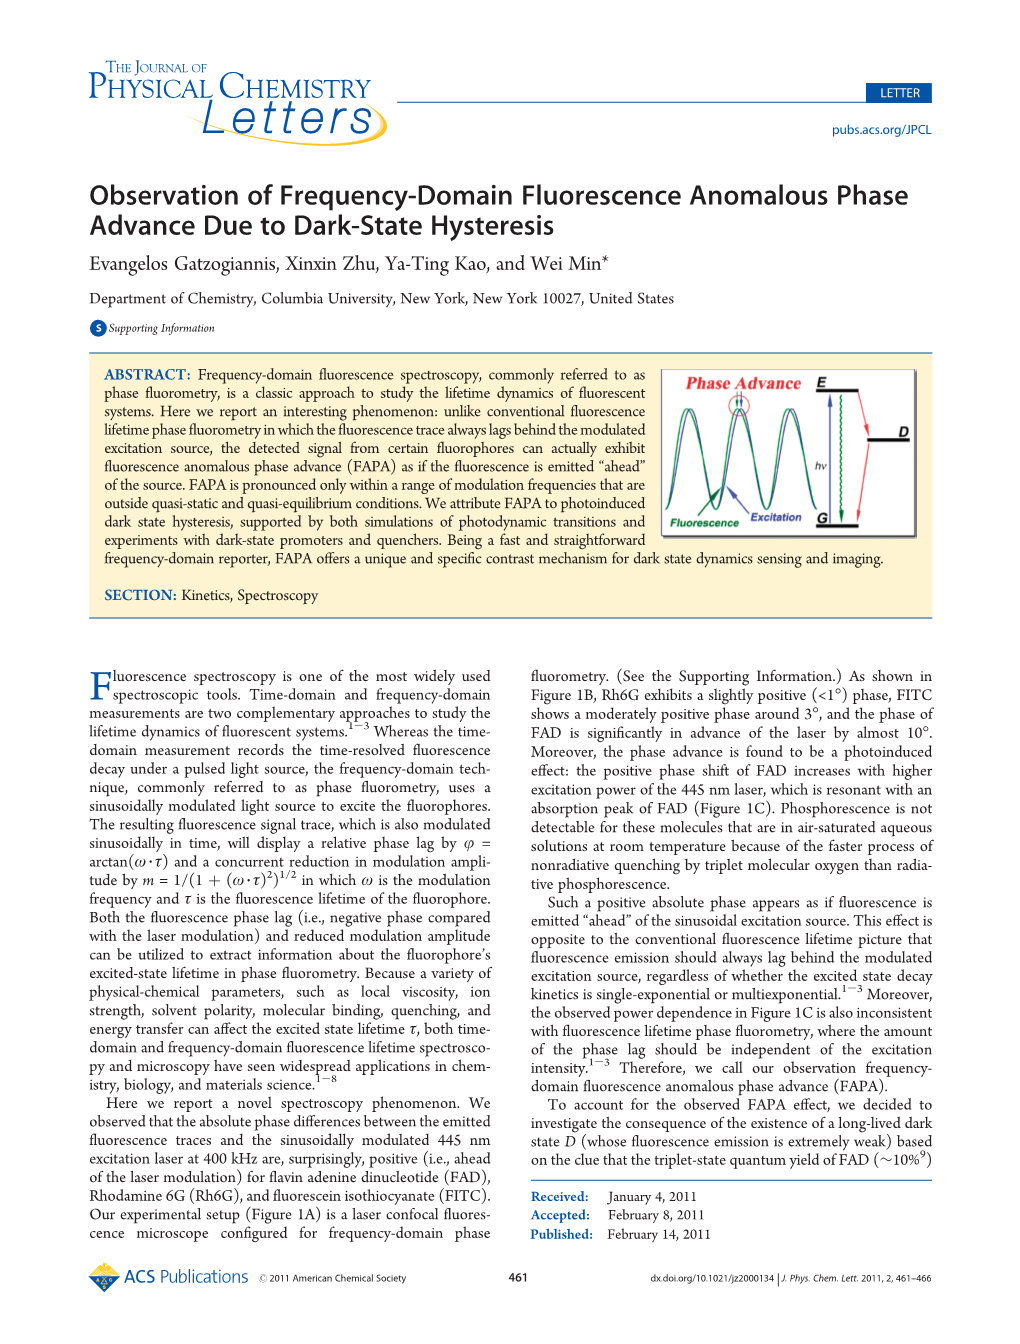 Observation of Frequency-Domain Fluorescence Anomalous Phase